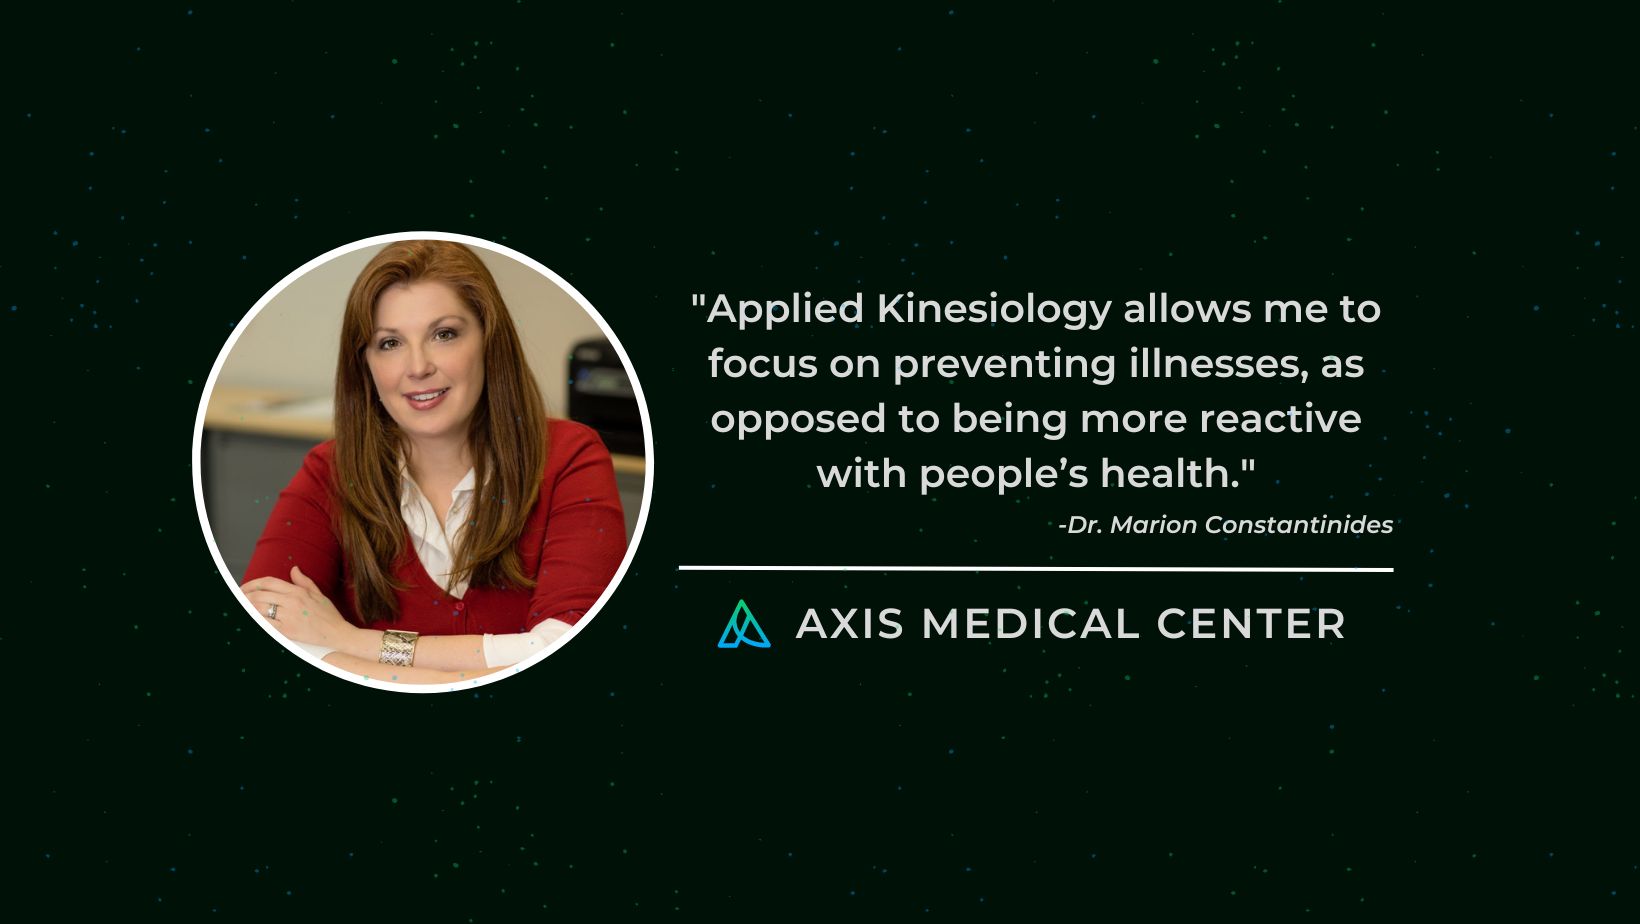 Quote by Dr. Constantinides stating "Applied Kinesiology allows me to focus on preventing illnesses, as opposed to being more reactive with people's health."